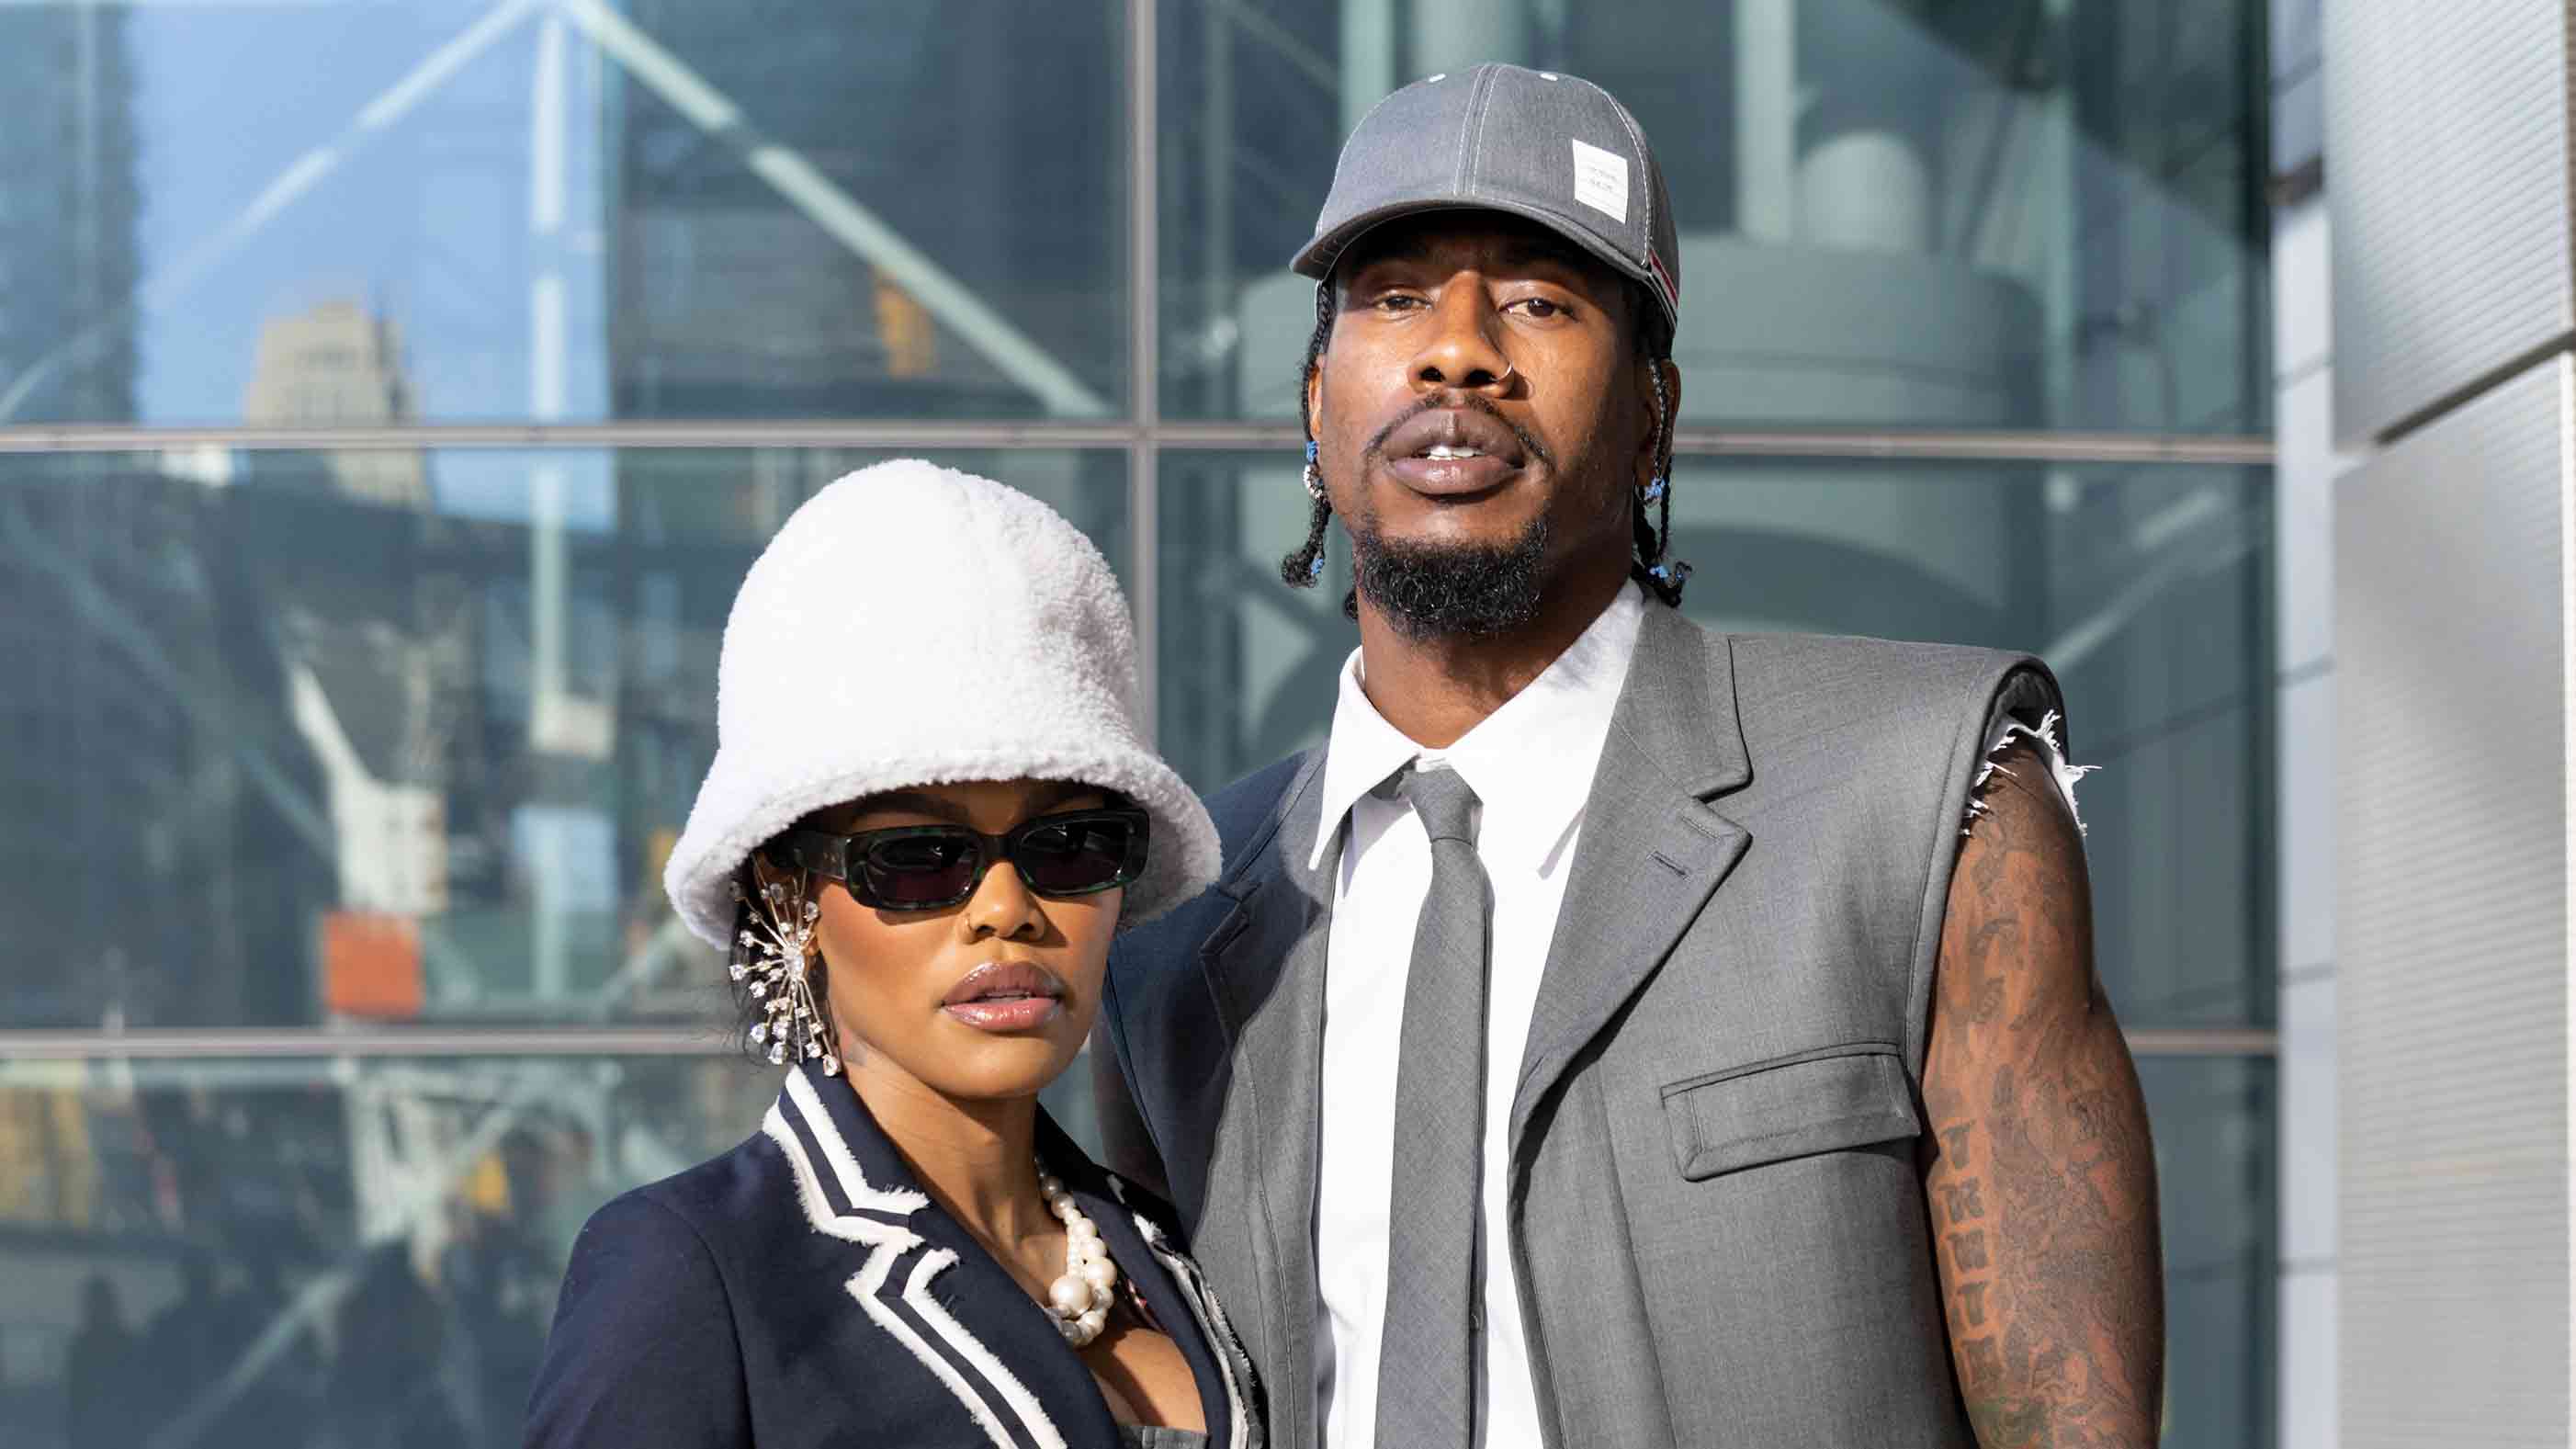 Teyana Taylor Confirms Split From Iman Shumpert After 7 Years of